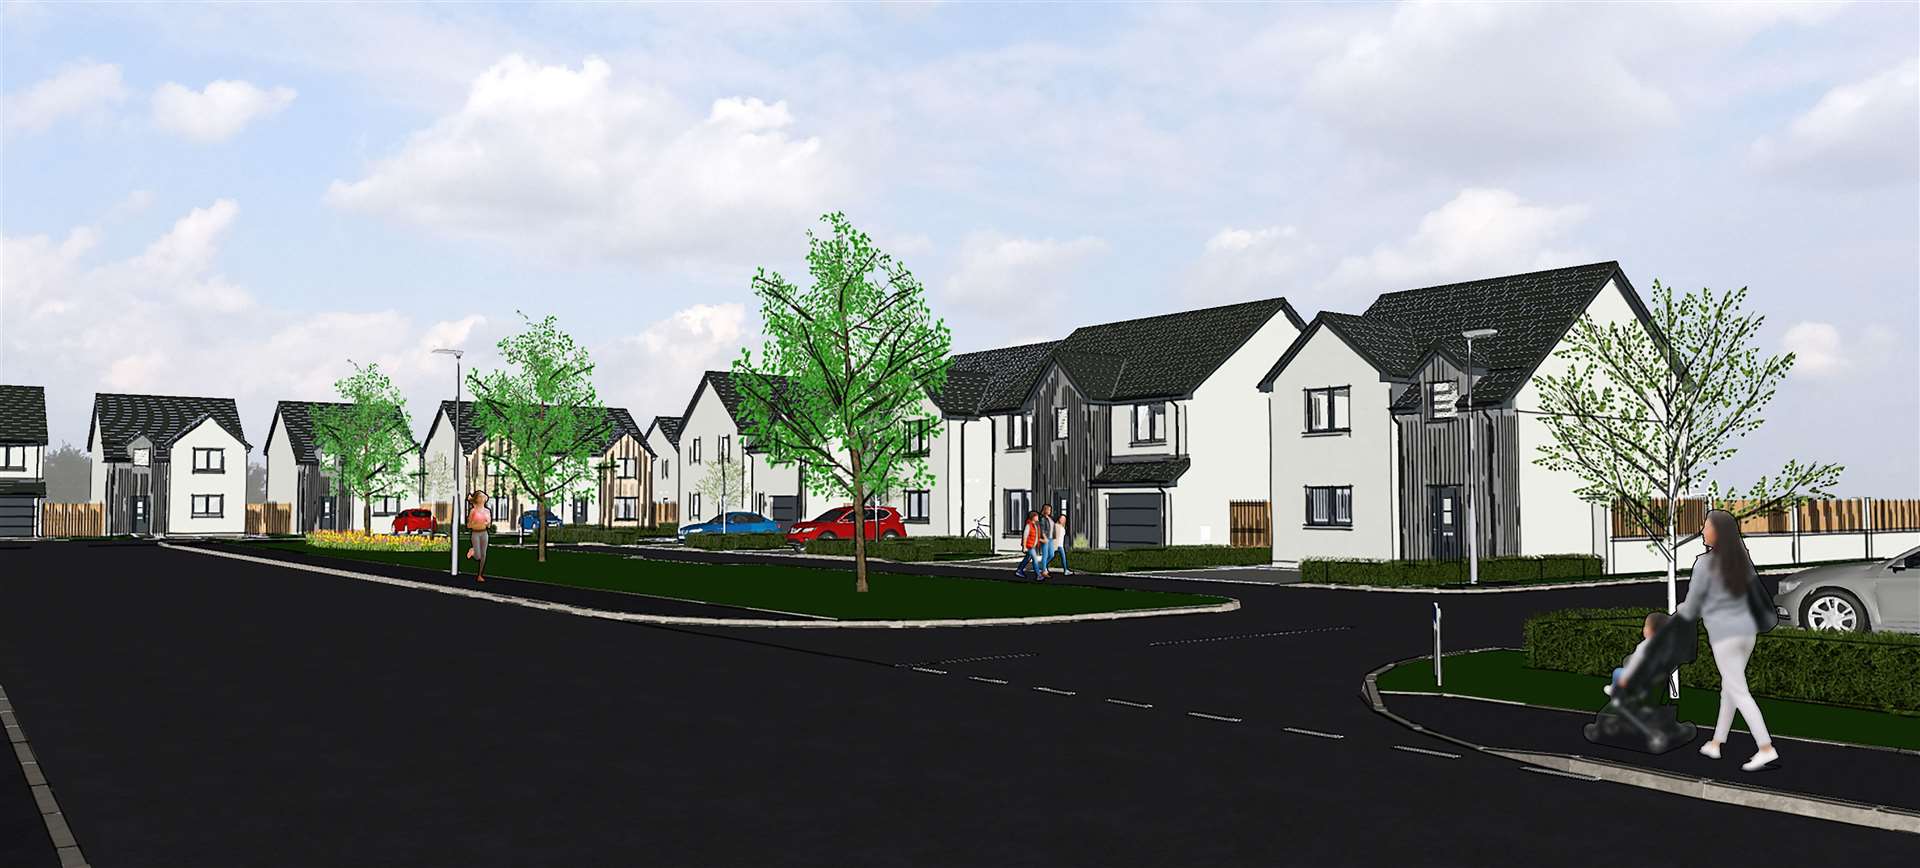 Artist's impression released by Kirkwood Homes of how the Fairways development might look when finished.